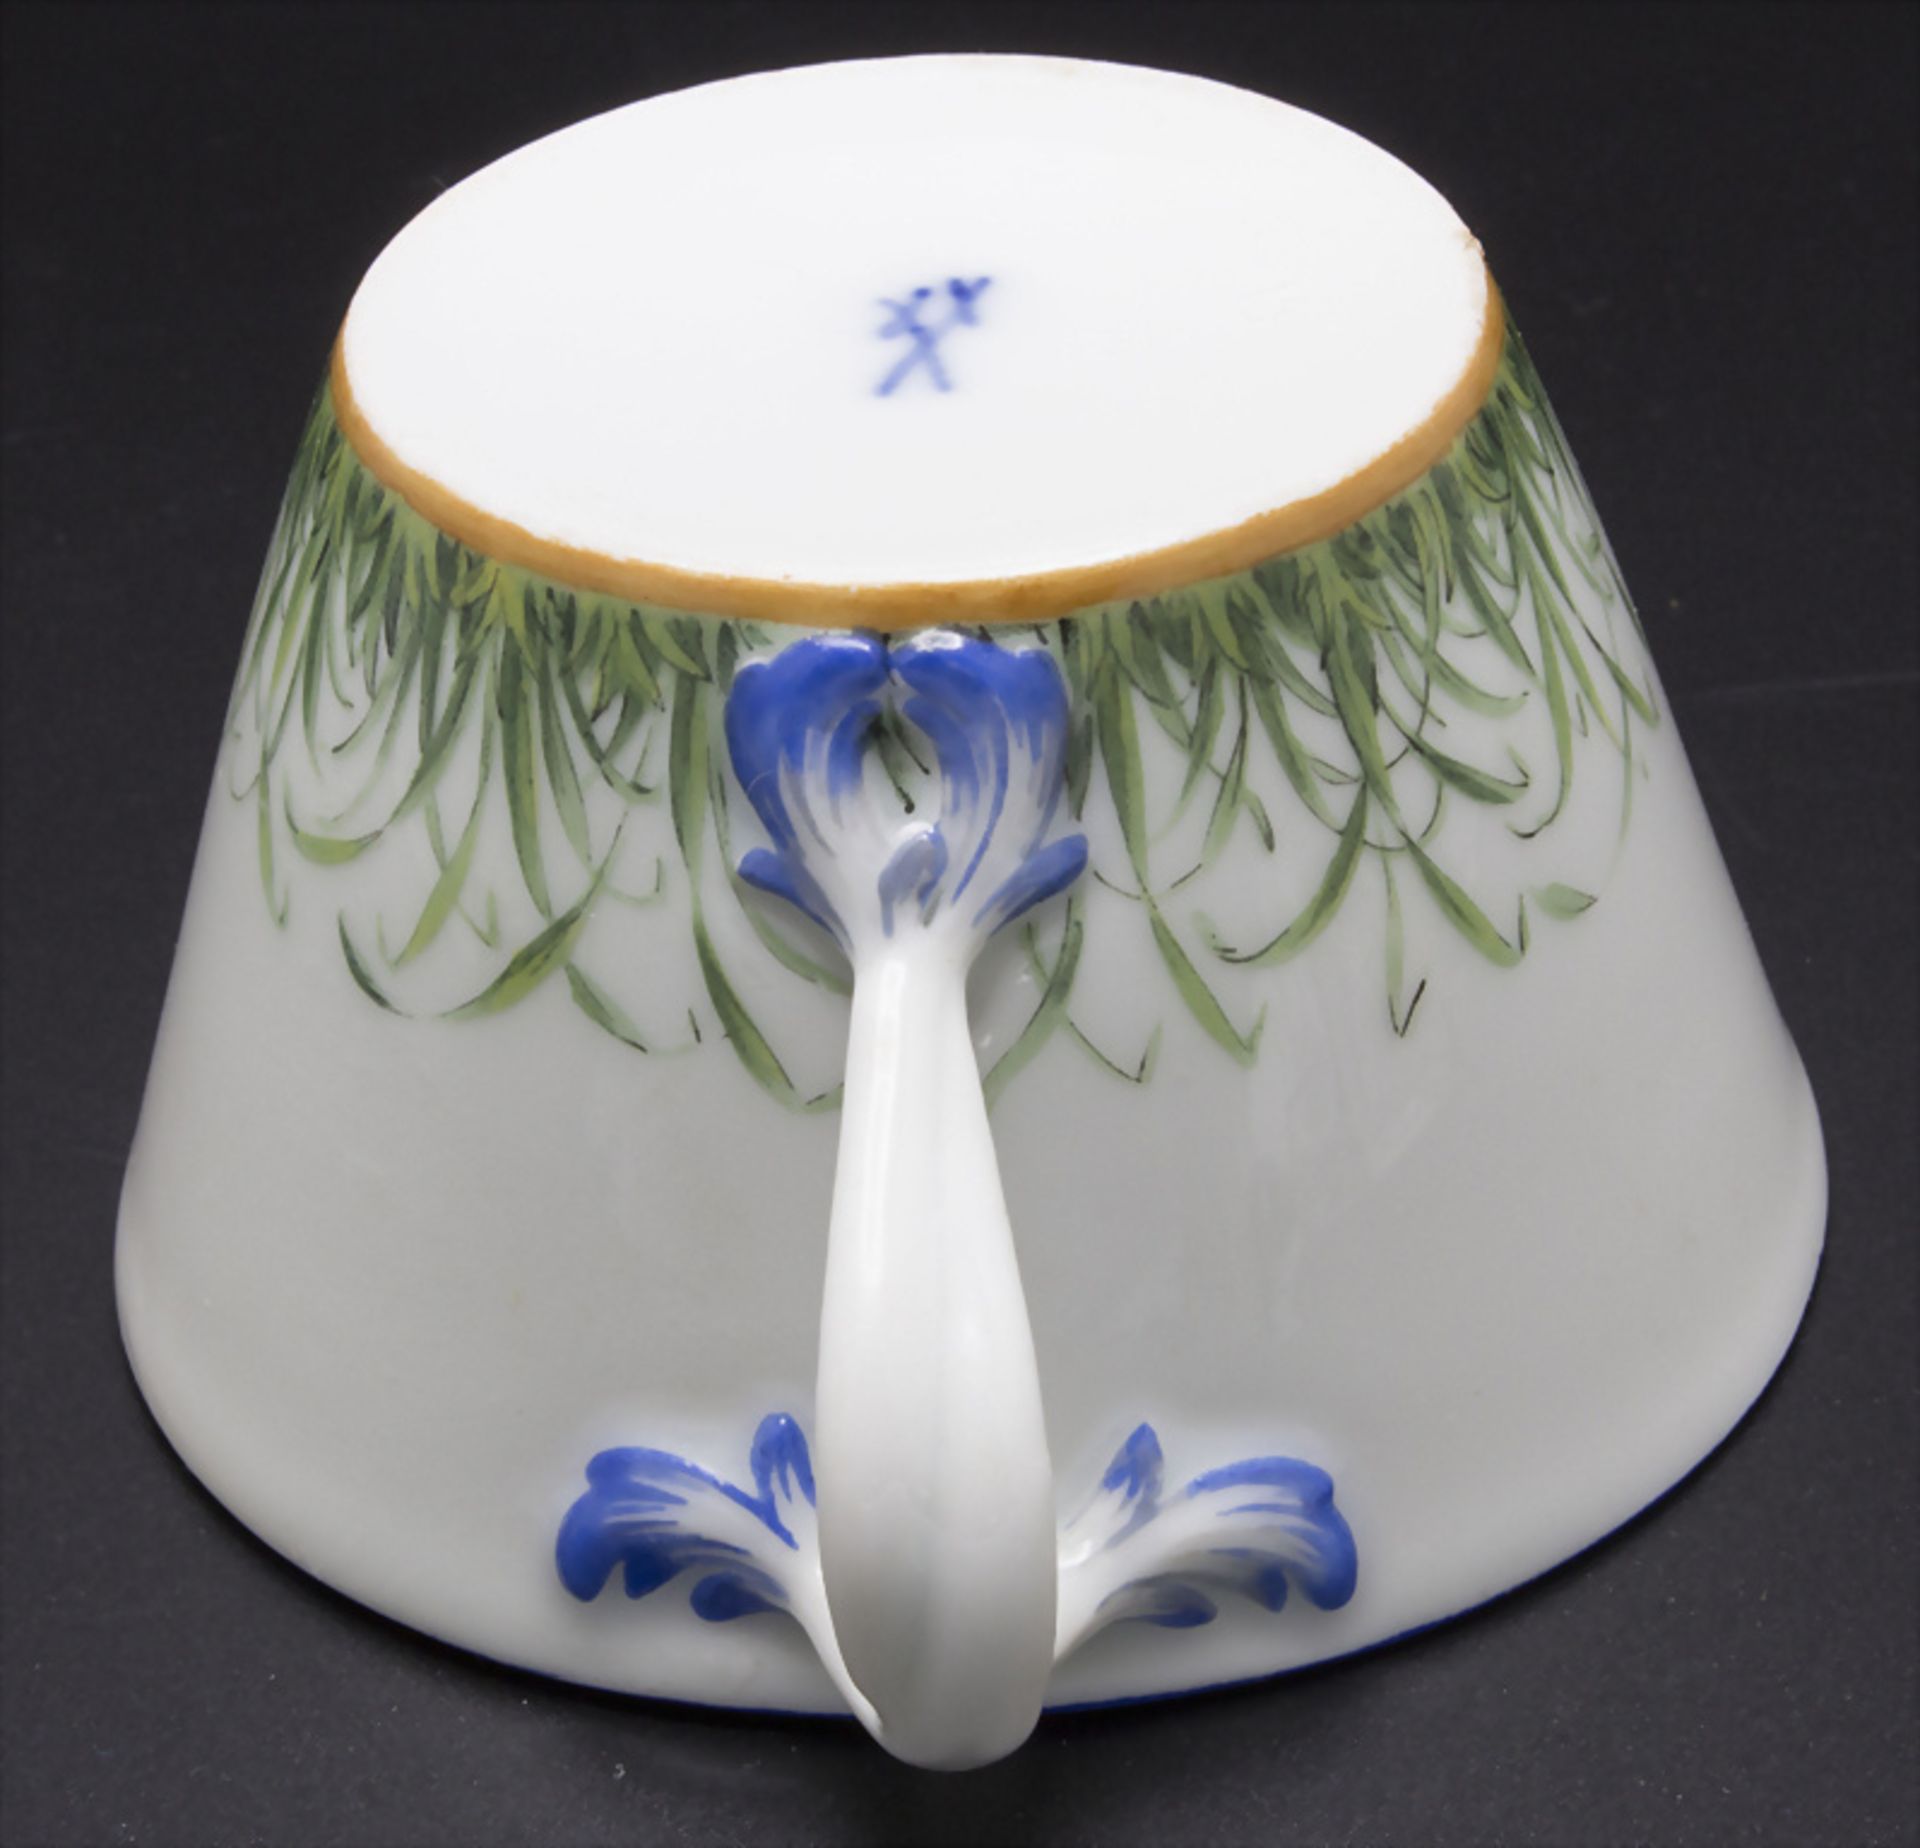 Tasse und UT mit Monogramm / A cup with saucer with monogram, Meissen, Anfang 19. Jh. - Image 15 of 18